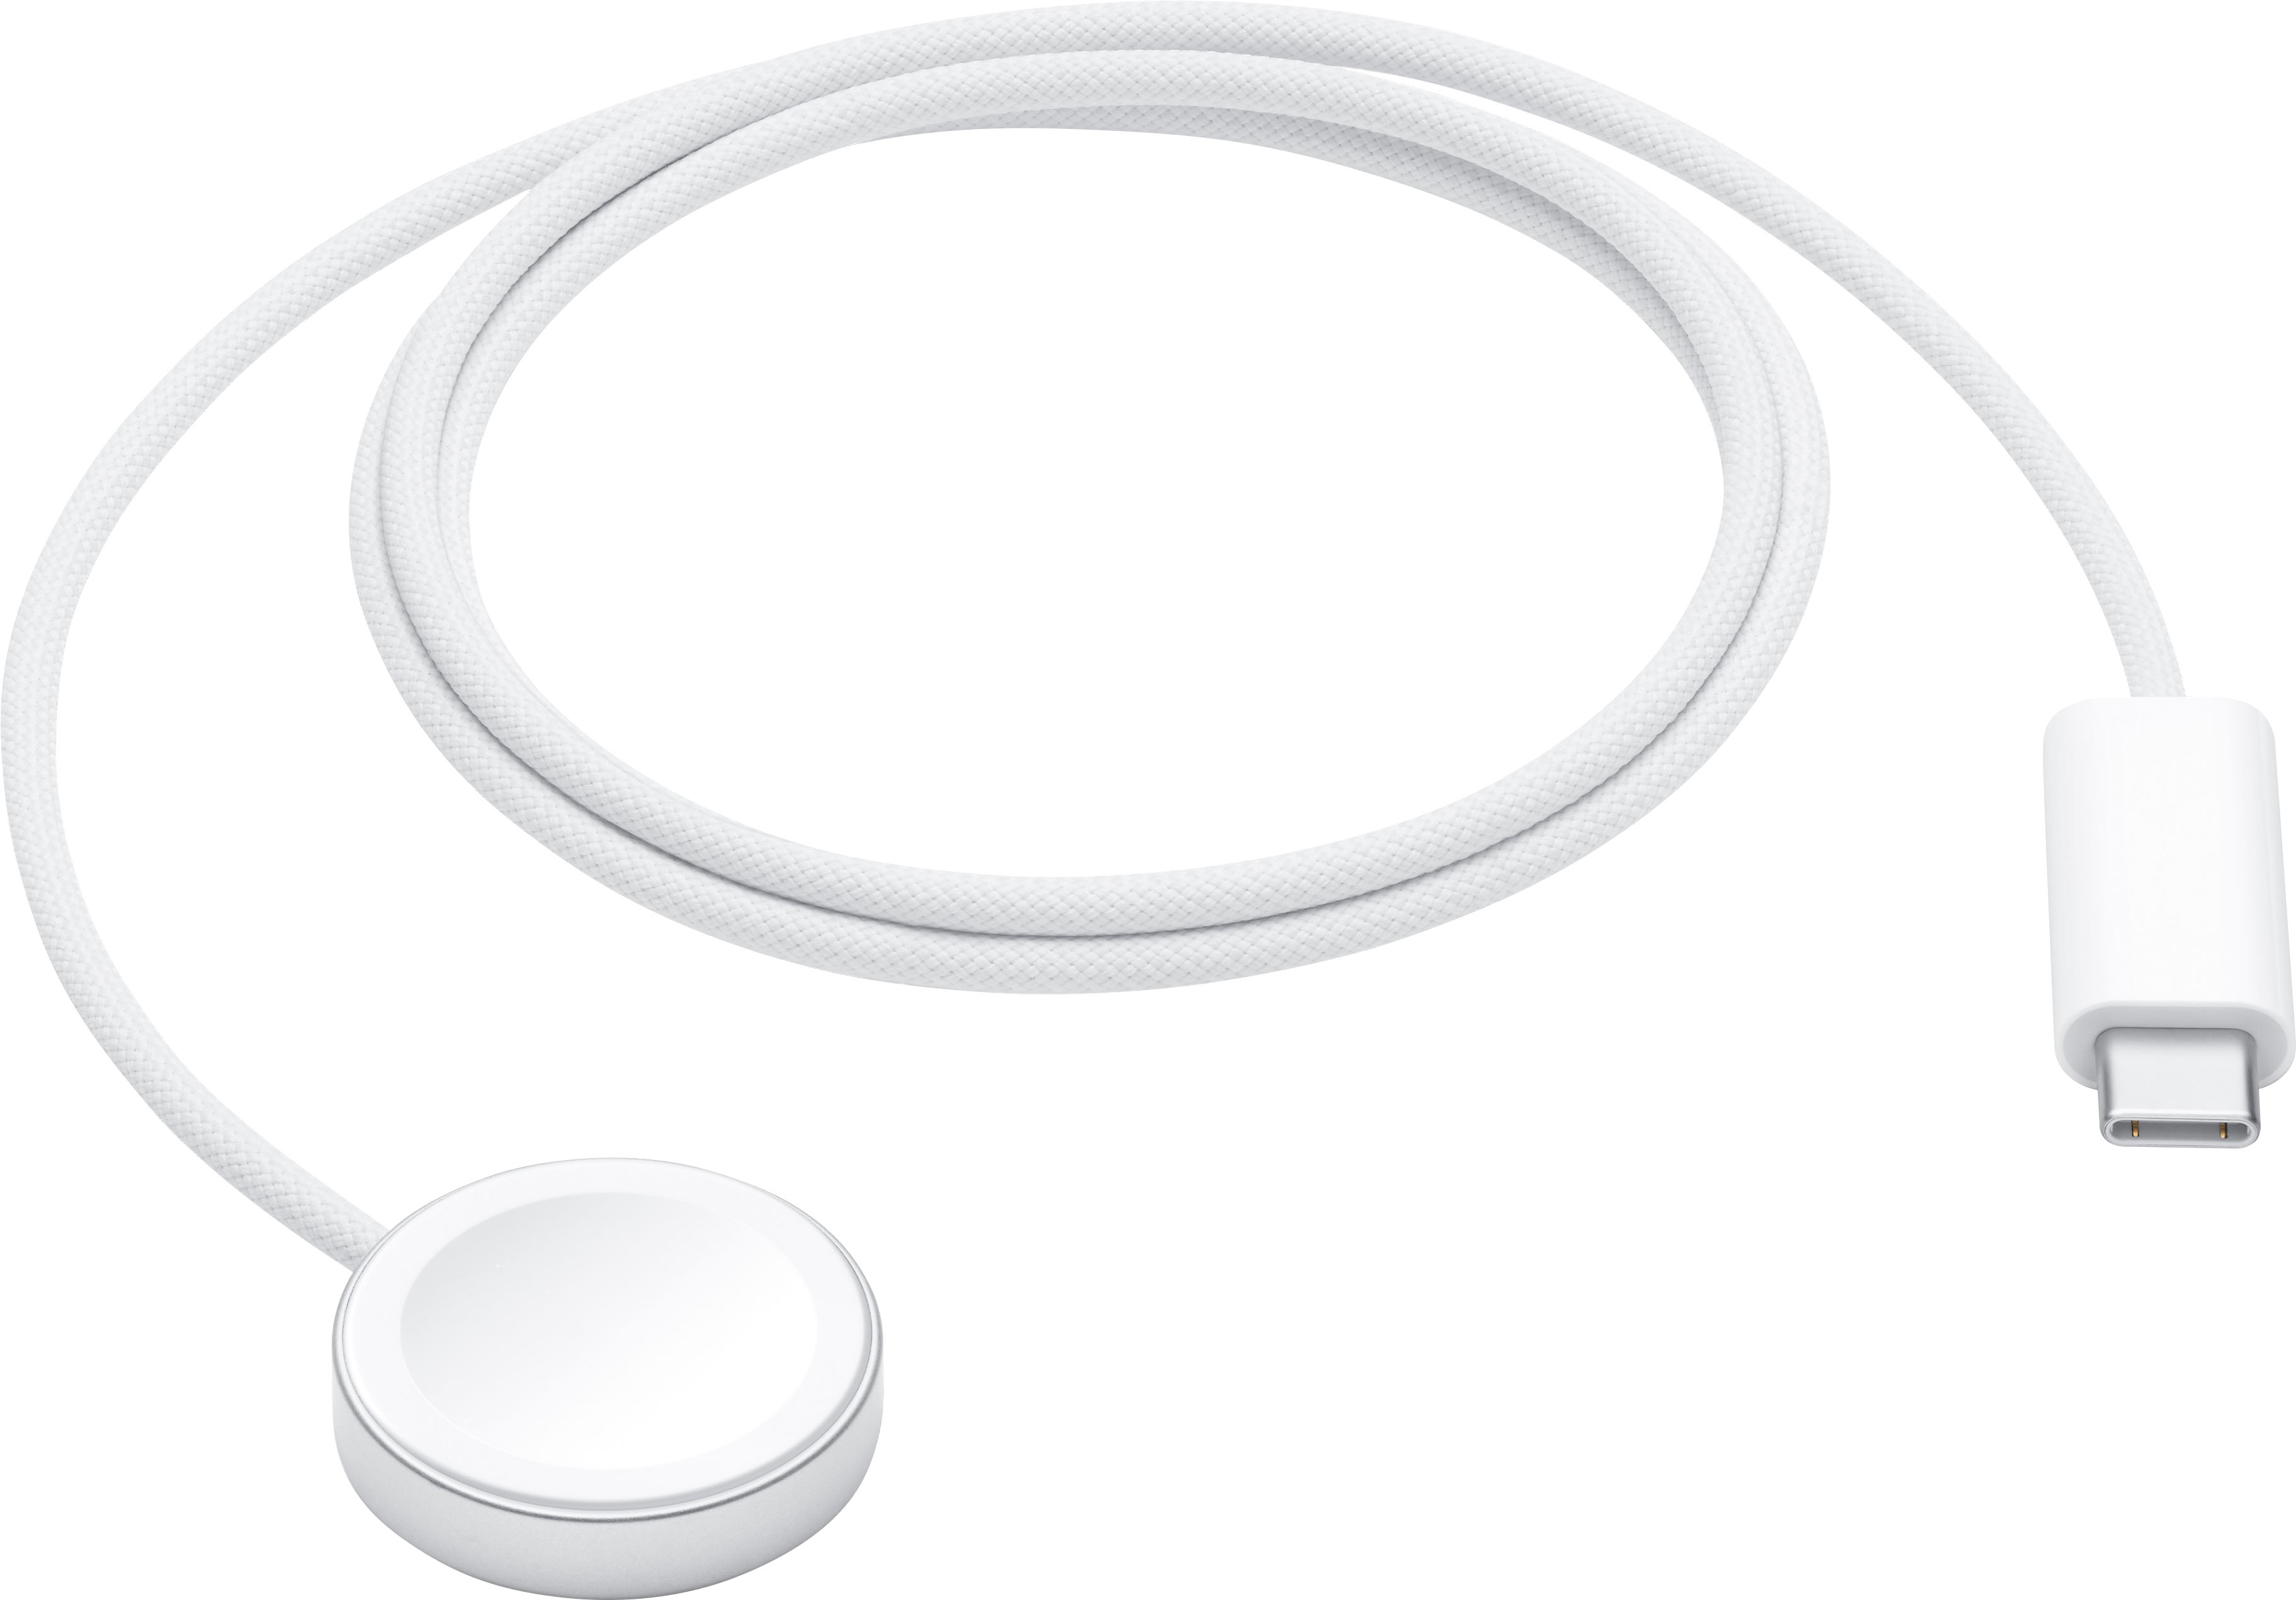 Apple Watch Magnetic Charging Cable (1 m) - Apple